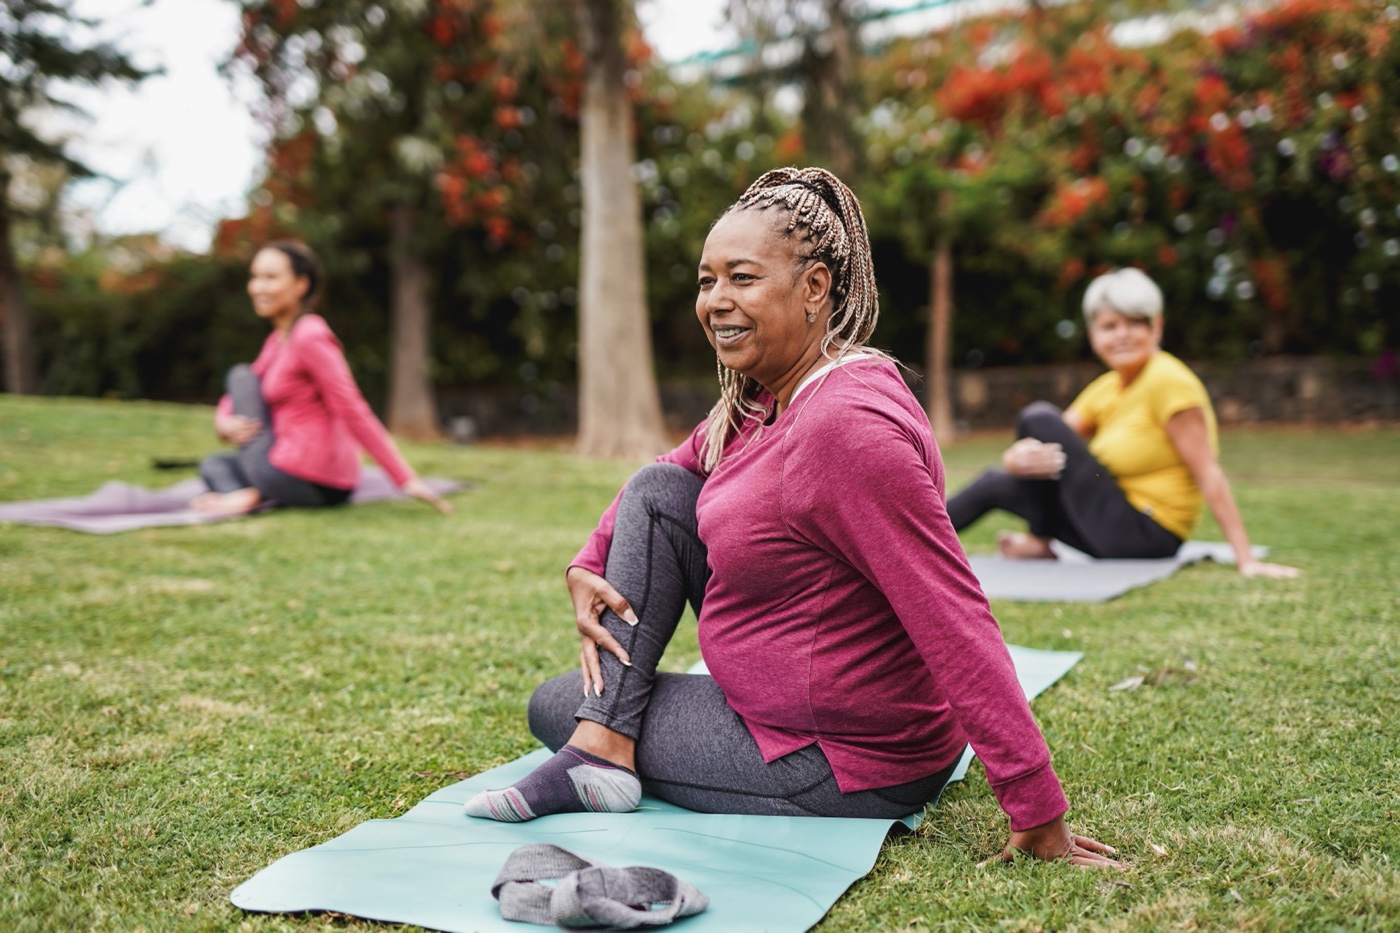 Multiracial women doing yoga exercise with social distance for coronavirus outbreak at park outdoor - Healthy lifestyle and sport concept-1308292203